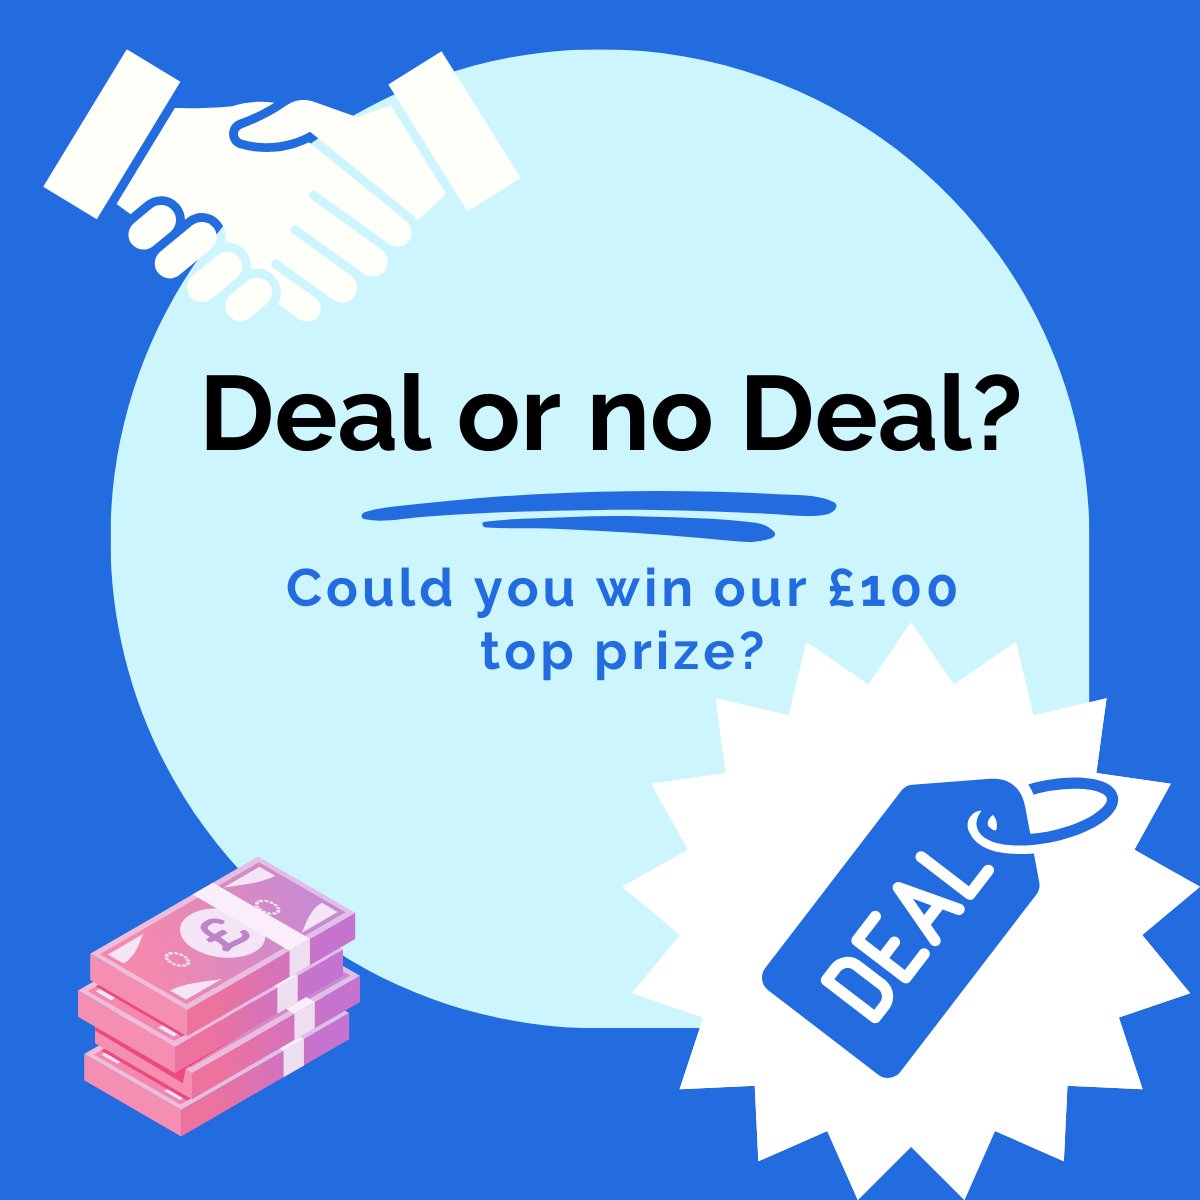 Just a week to go until our virtual game of #DealorNoDeal! Could you beat the banker and bag yourself the £100 top prize, whilst raising vital funds for Aphasia Support? The game will be on Zoom from Mon 27th to Weds 29th. To enter email lspirrett@aphasiasupport.org